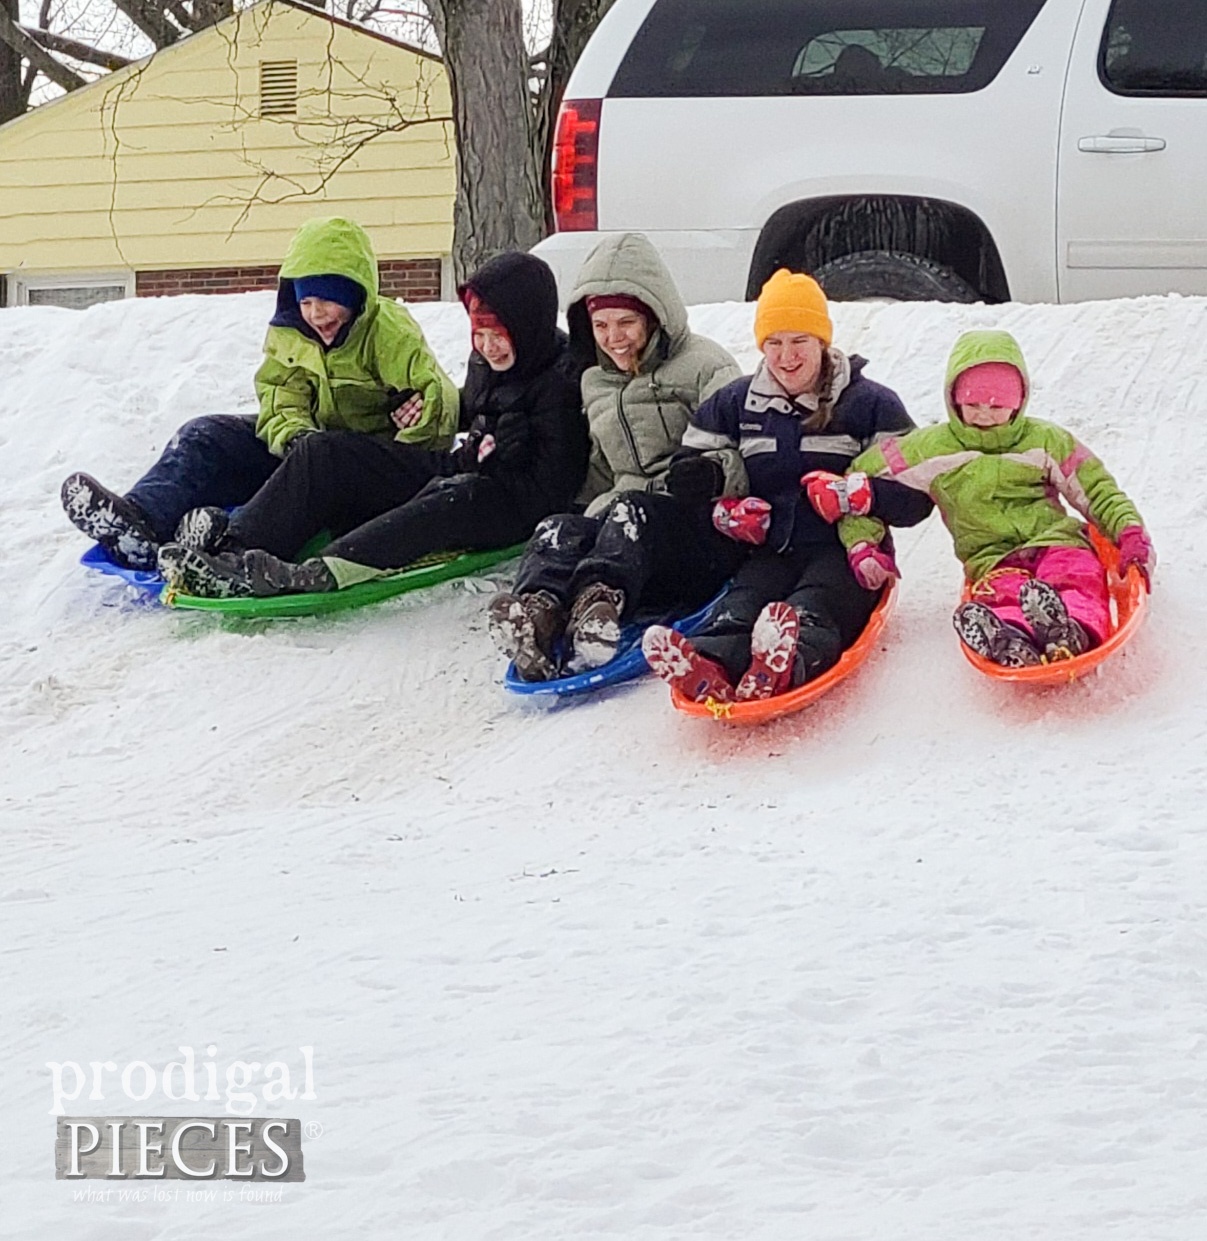 Prodigal Pieces Family Sledding | Planning on an Empty Nest | prodigalpieces.com #prodigalpieces